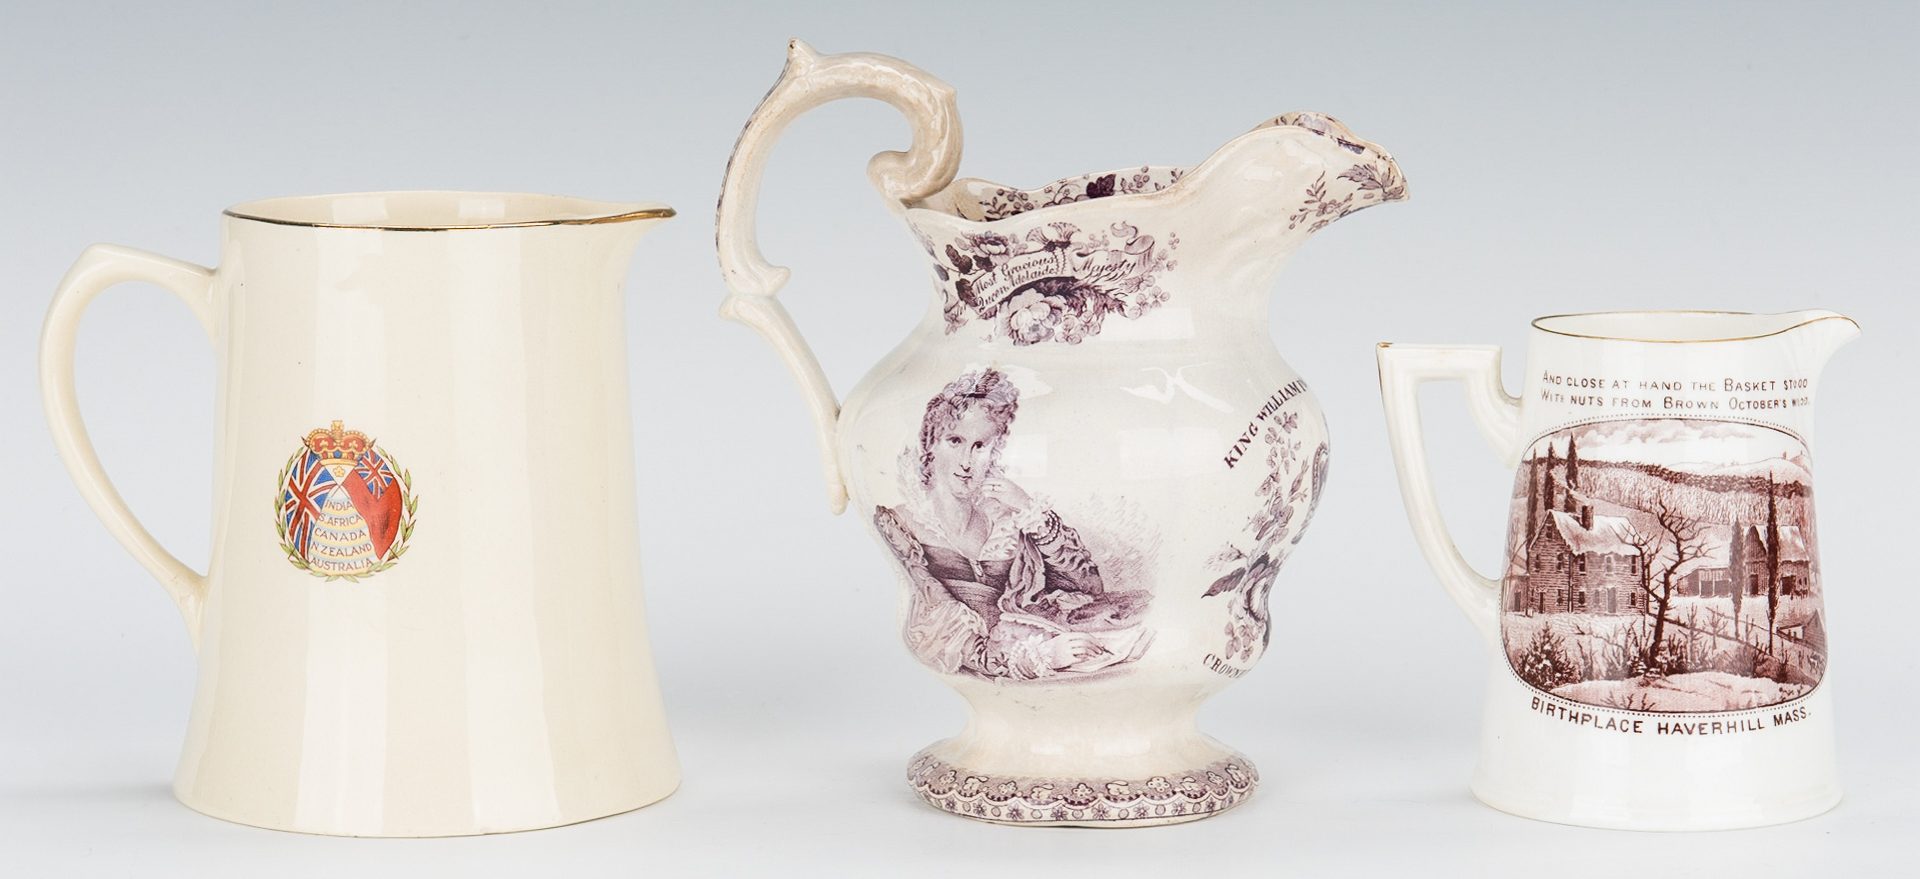 Lot 241: 7 Historical Transferware Pitchers incl. Waterloo, Farmers Arms